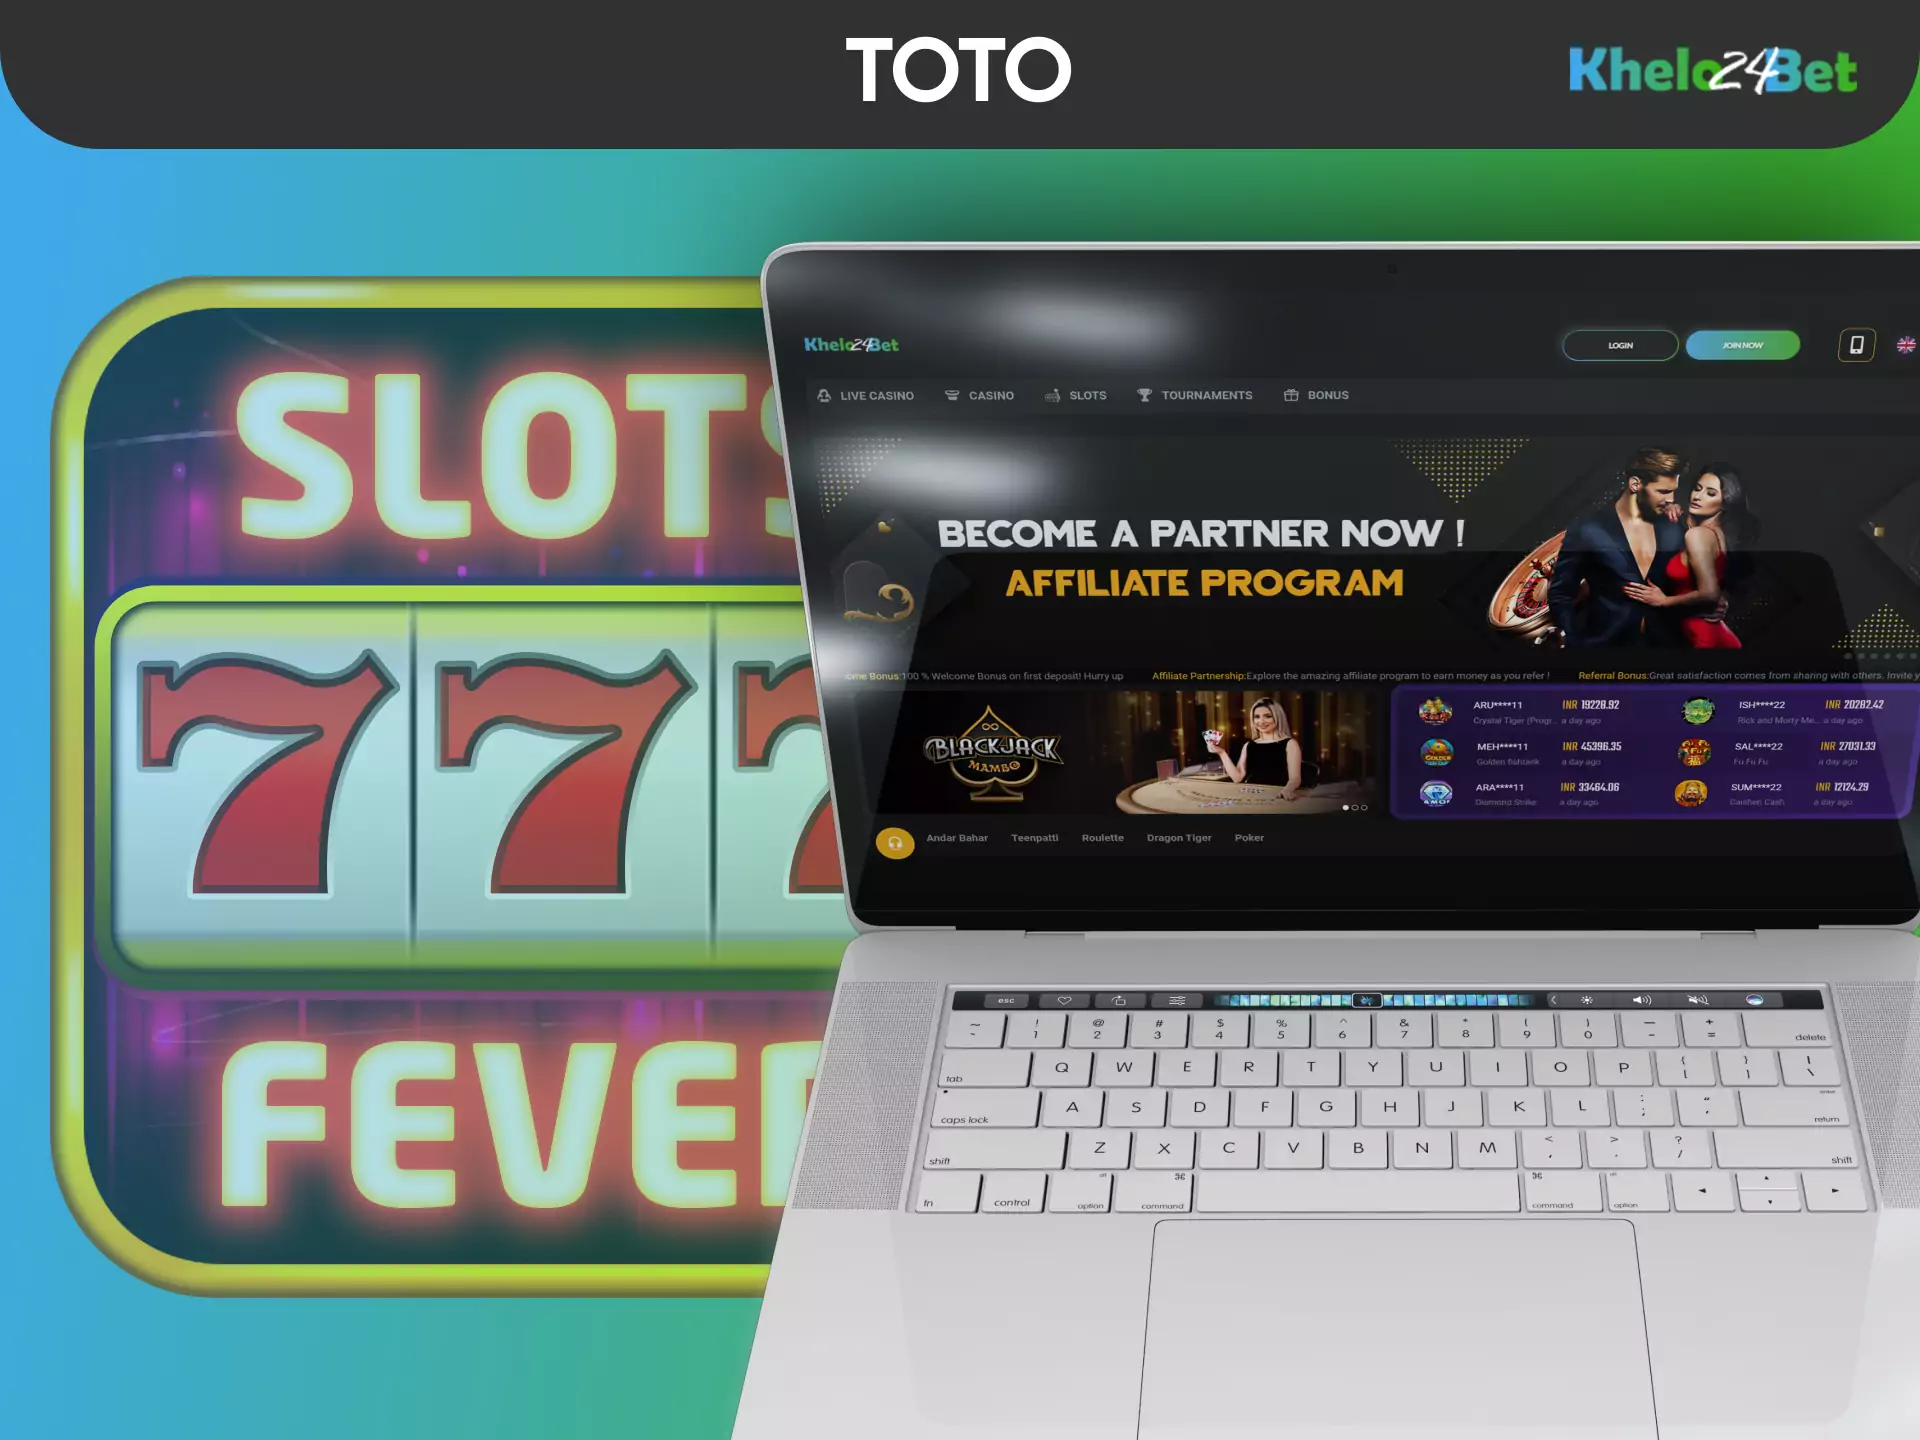 Unfortunately, you can't play TOTO on Khelo24bet yet.